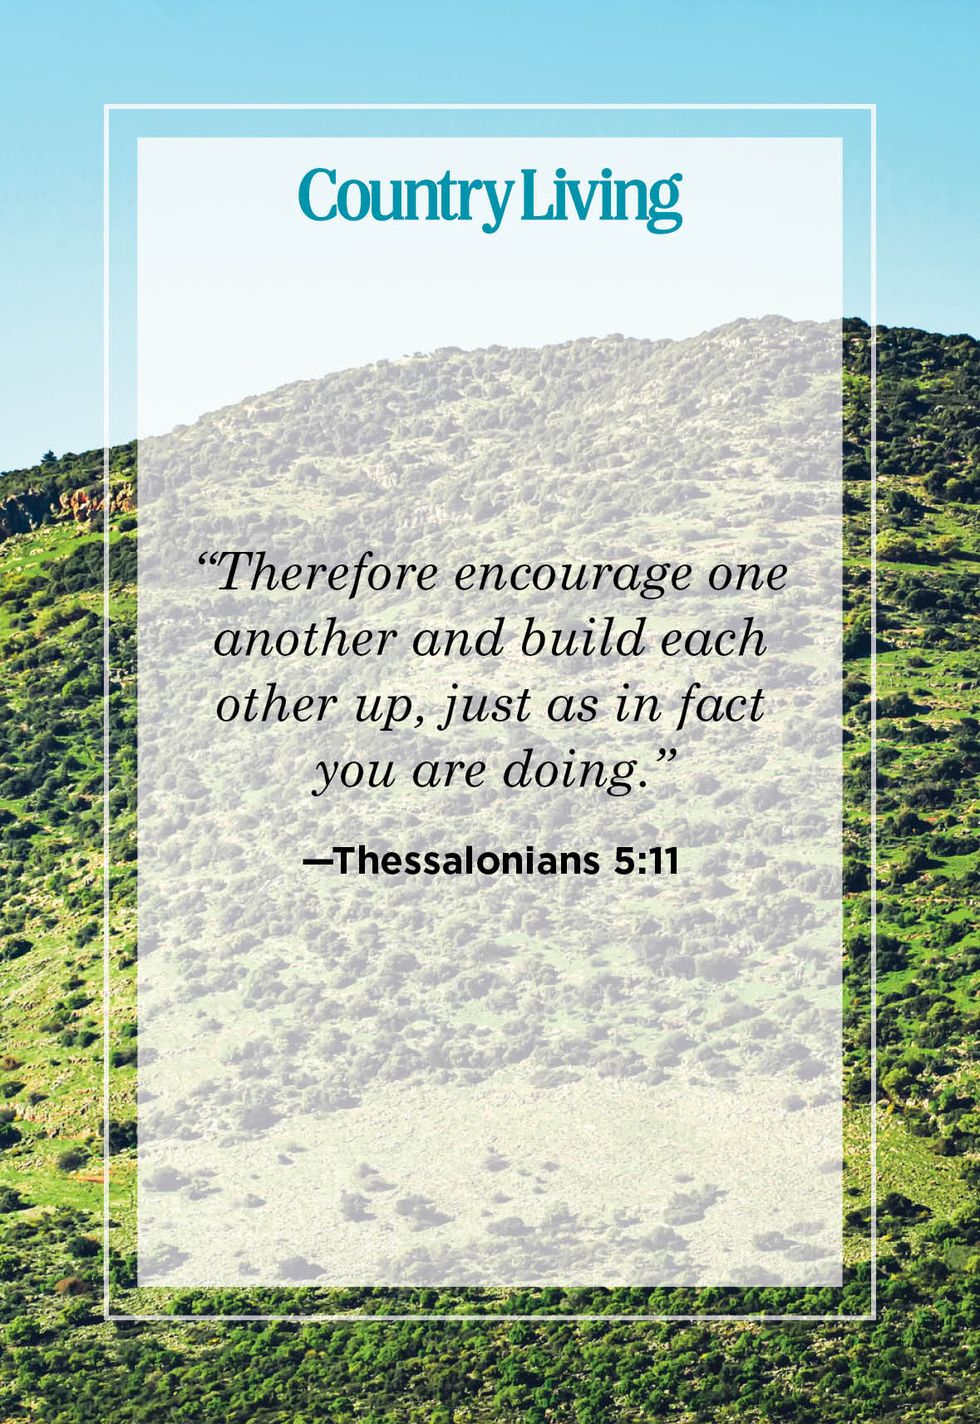 therefore encourage one another and build each other up just as in fact you are doing from thessalonians